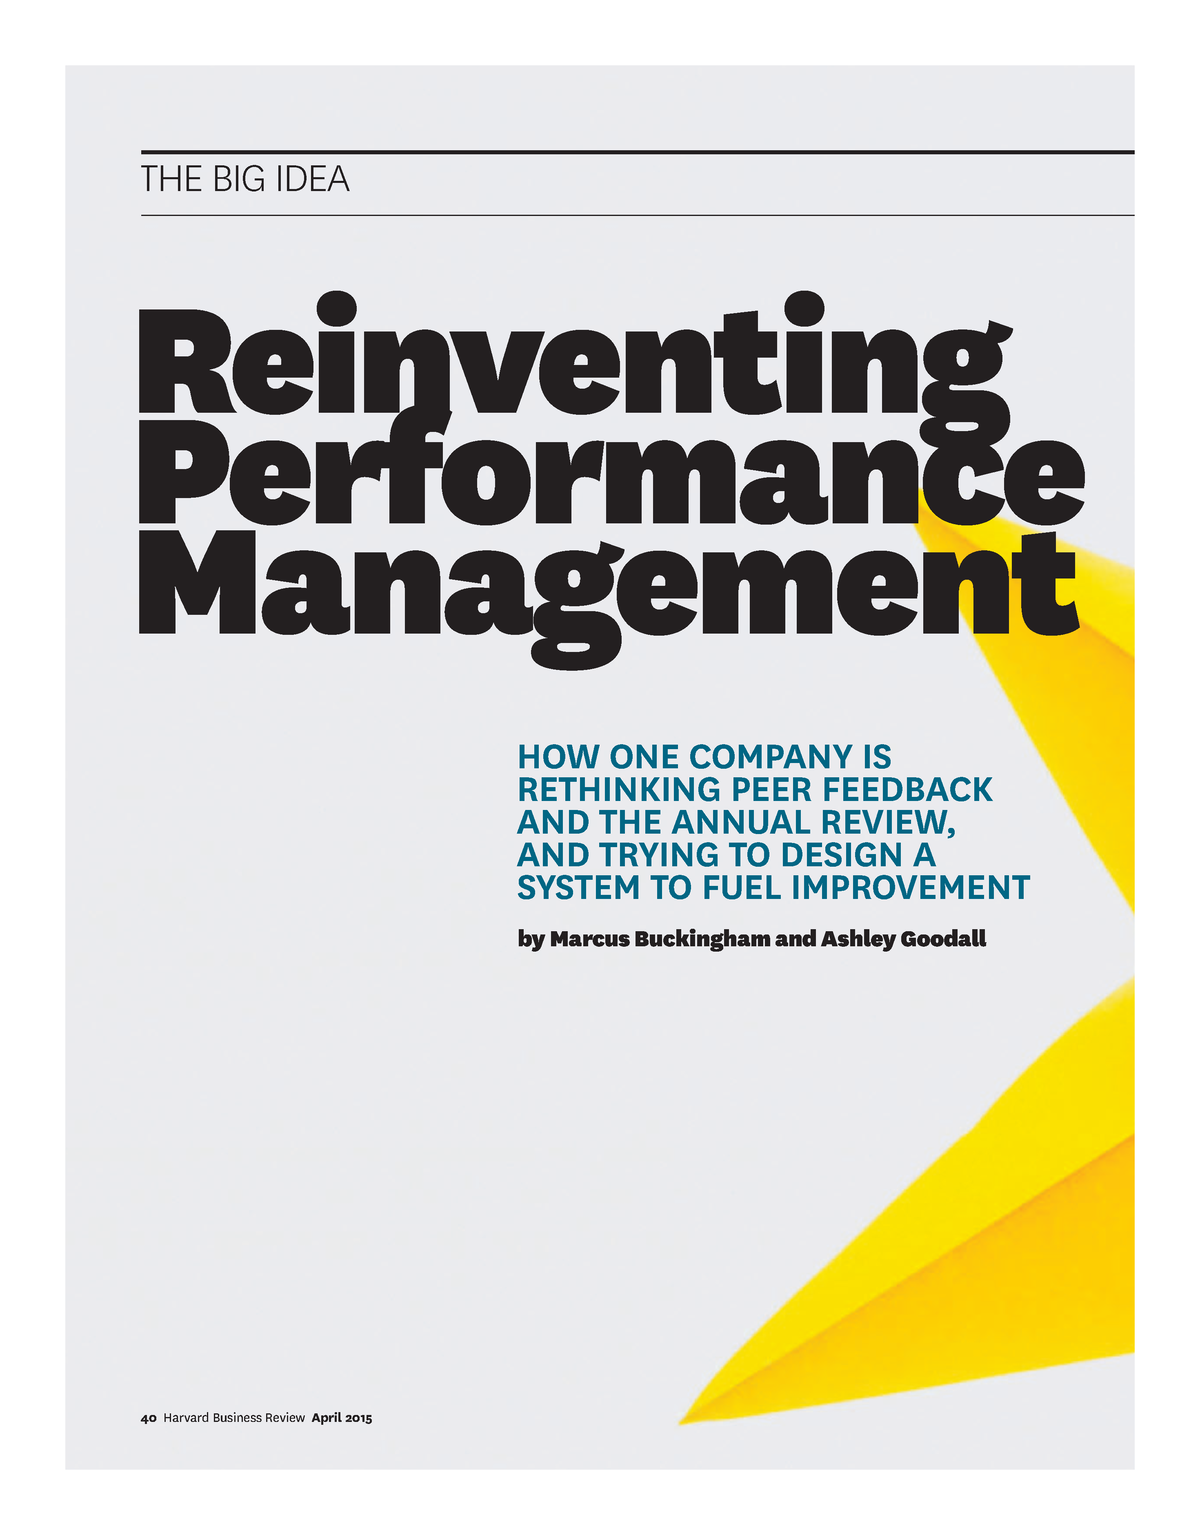 reinventing performance management at deloitte case study solution